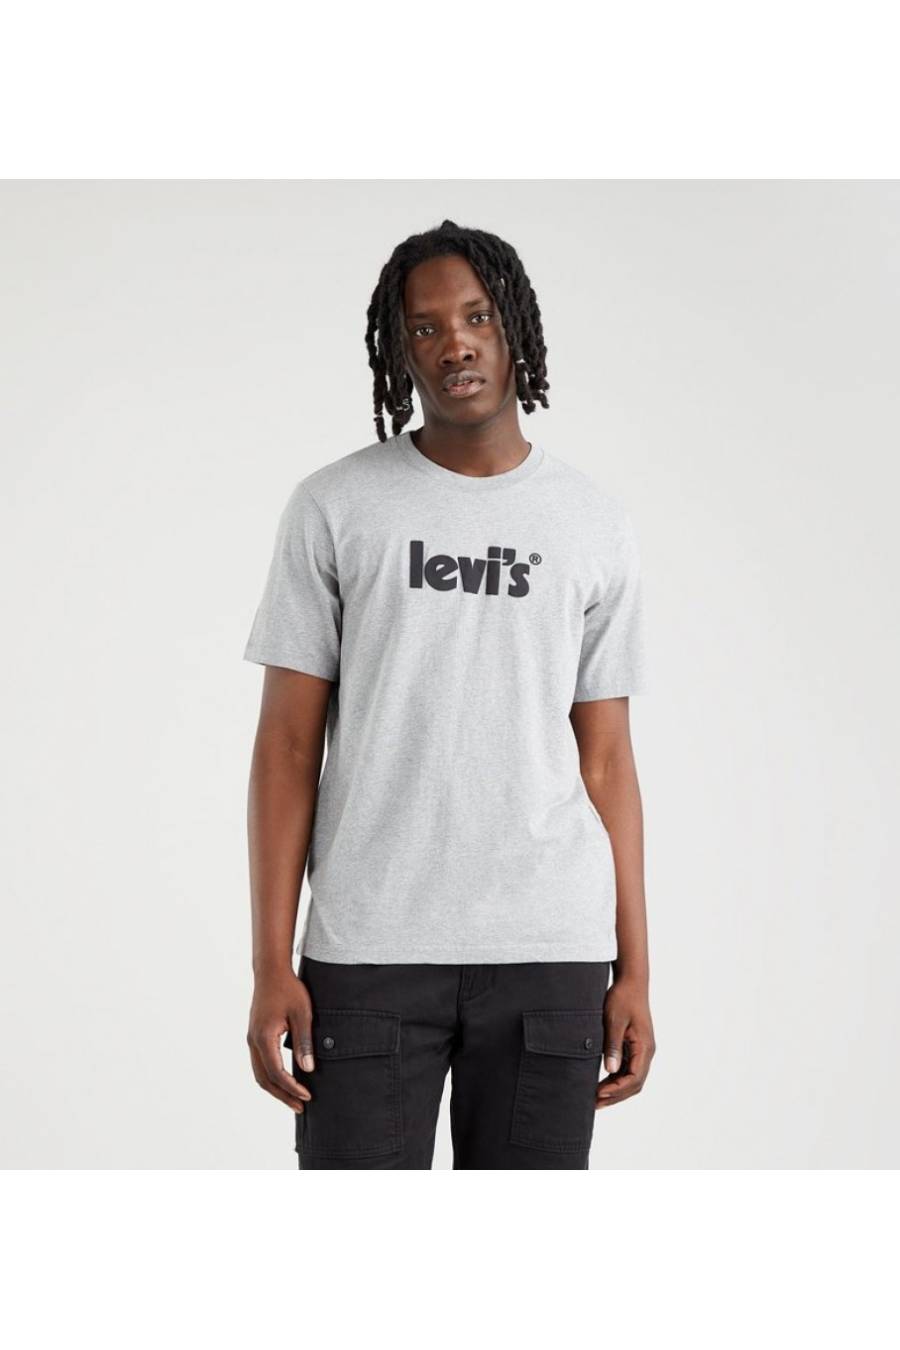 Camiseta Levi's Relaxed Fit 16143-0392